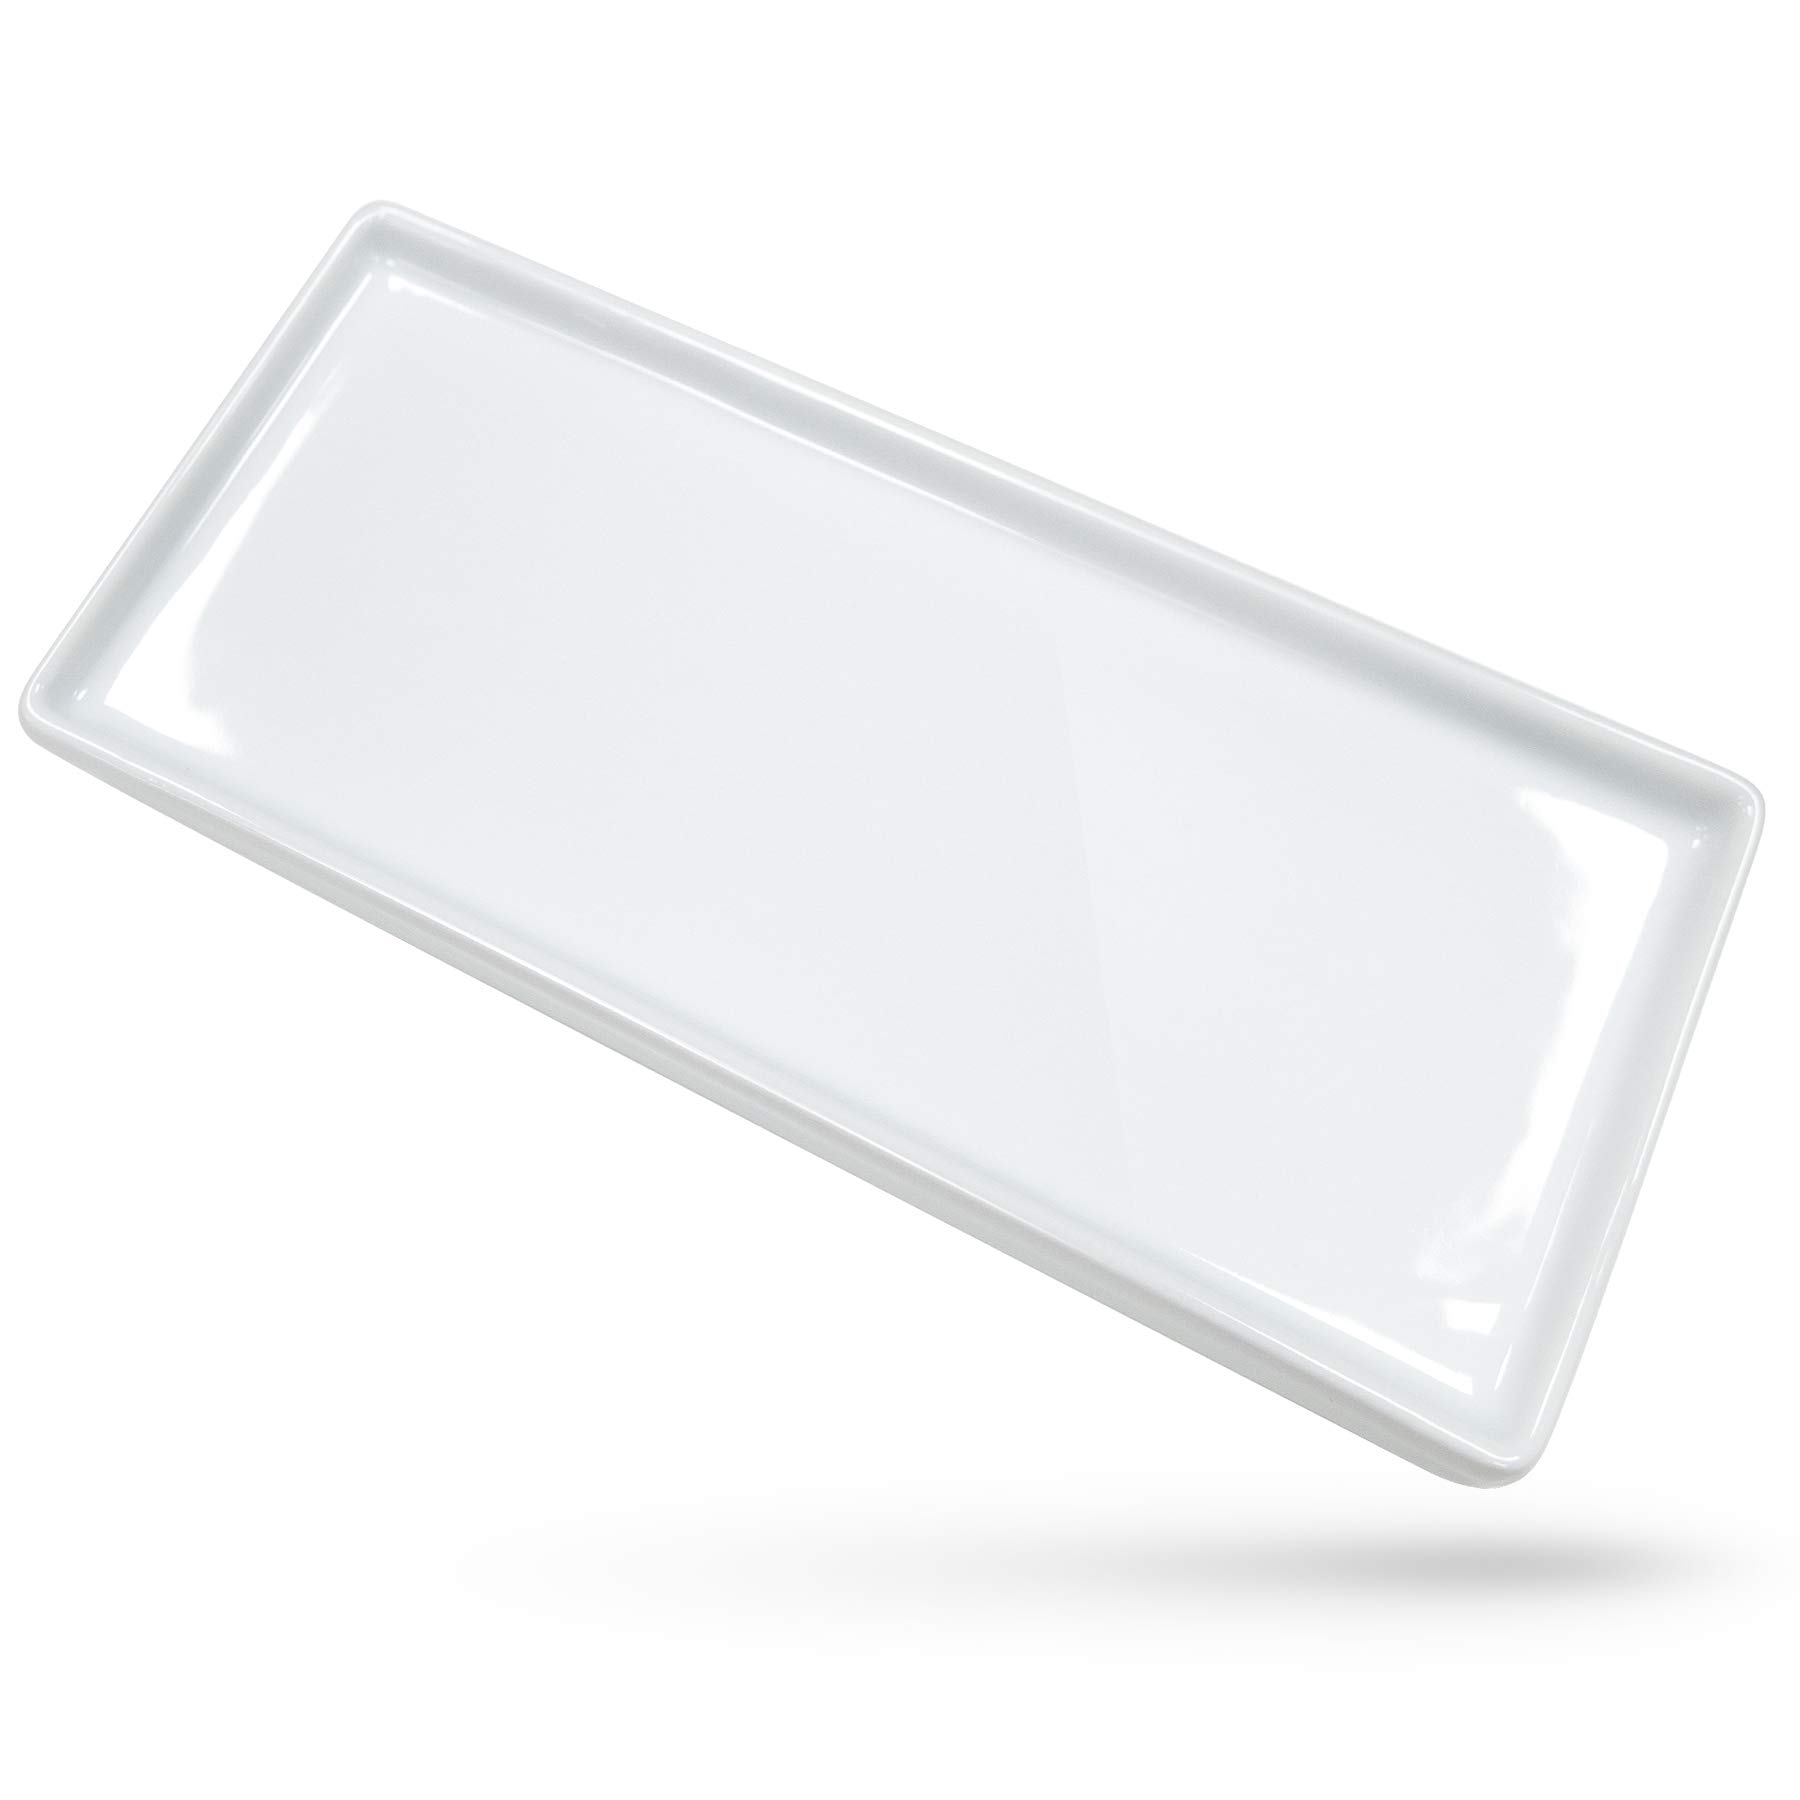 Toothbrush Holder Rectangle Tray for Vanity Countertop